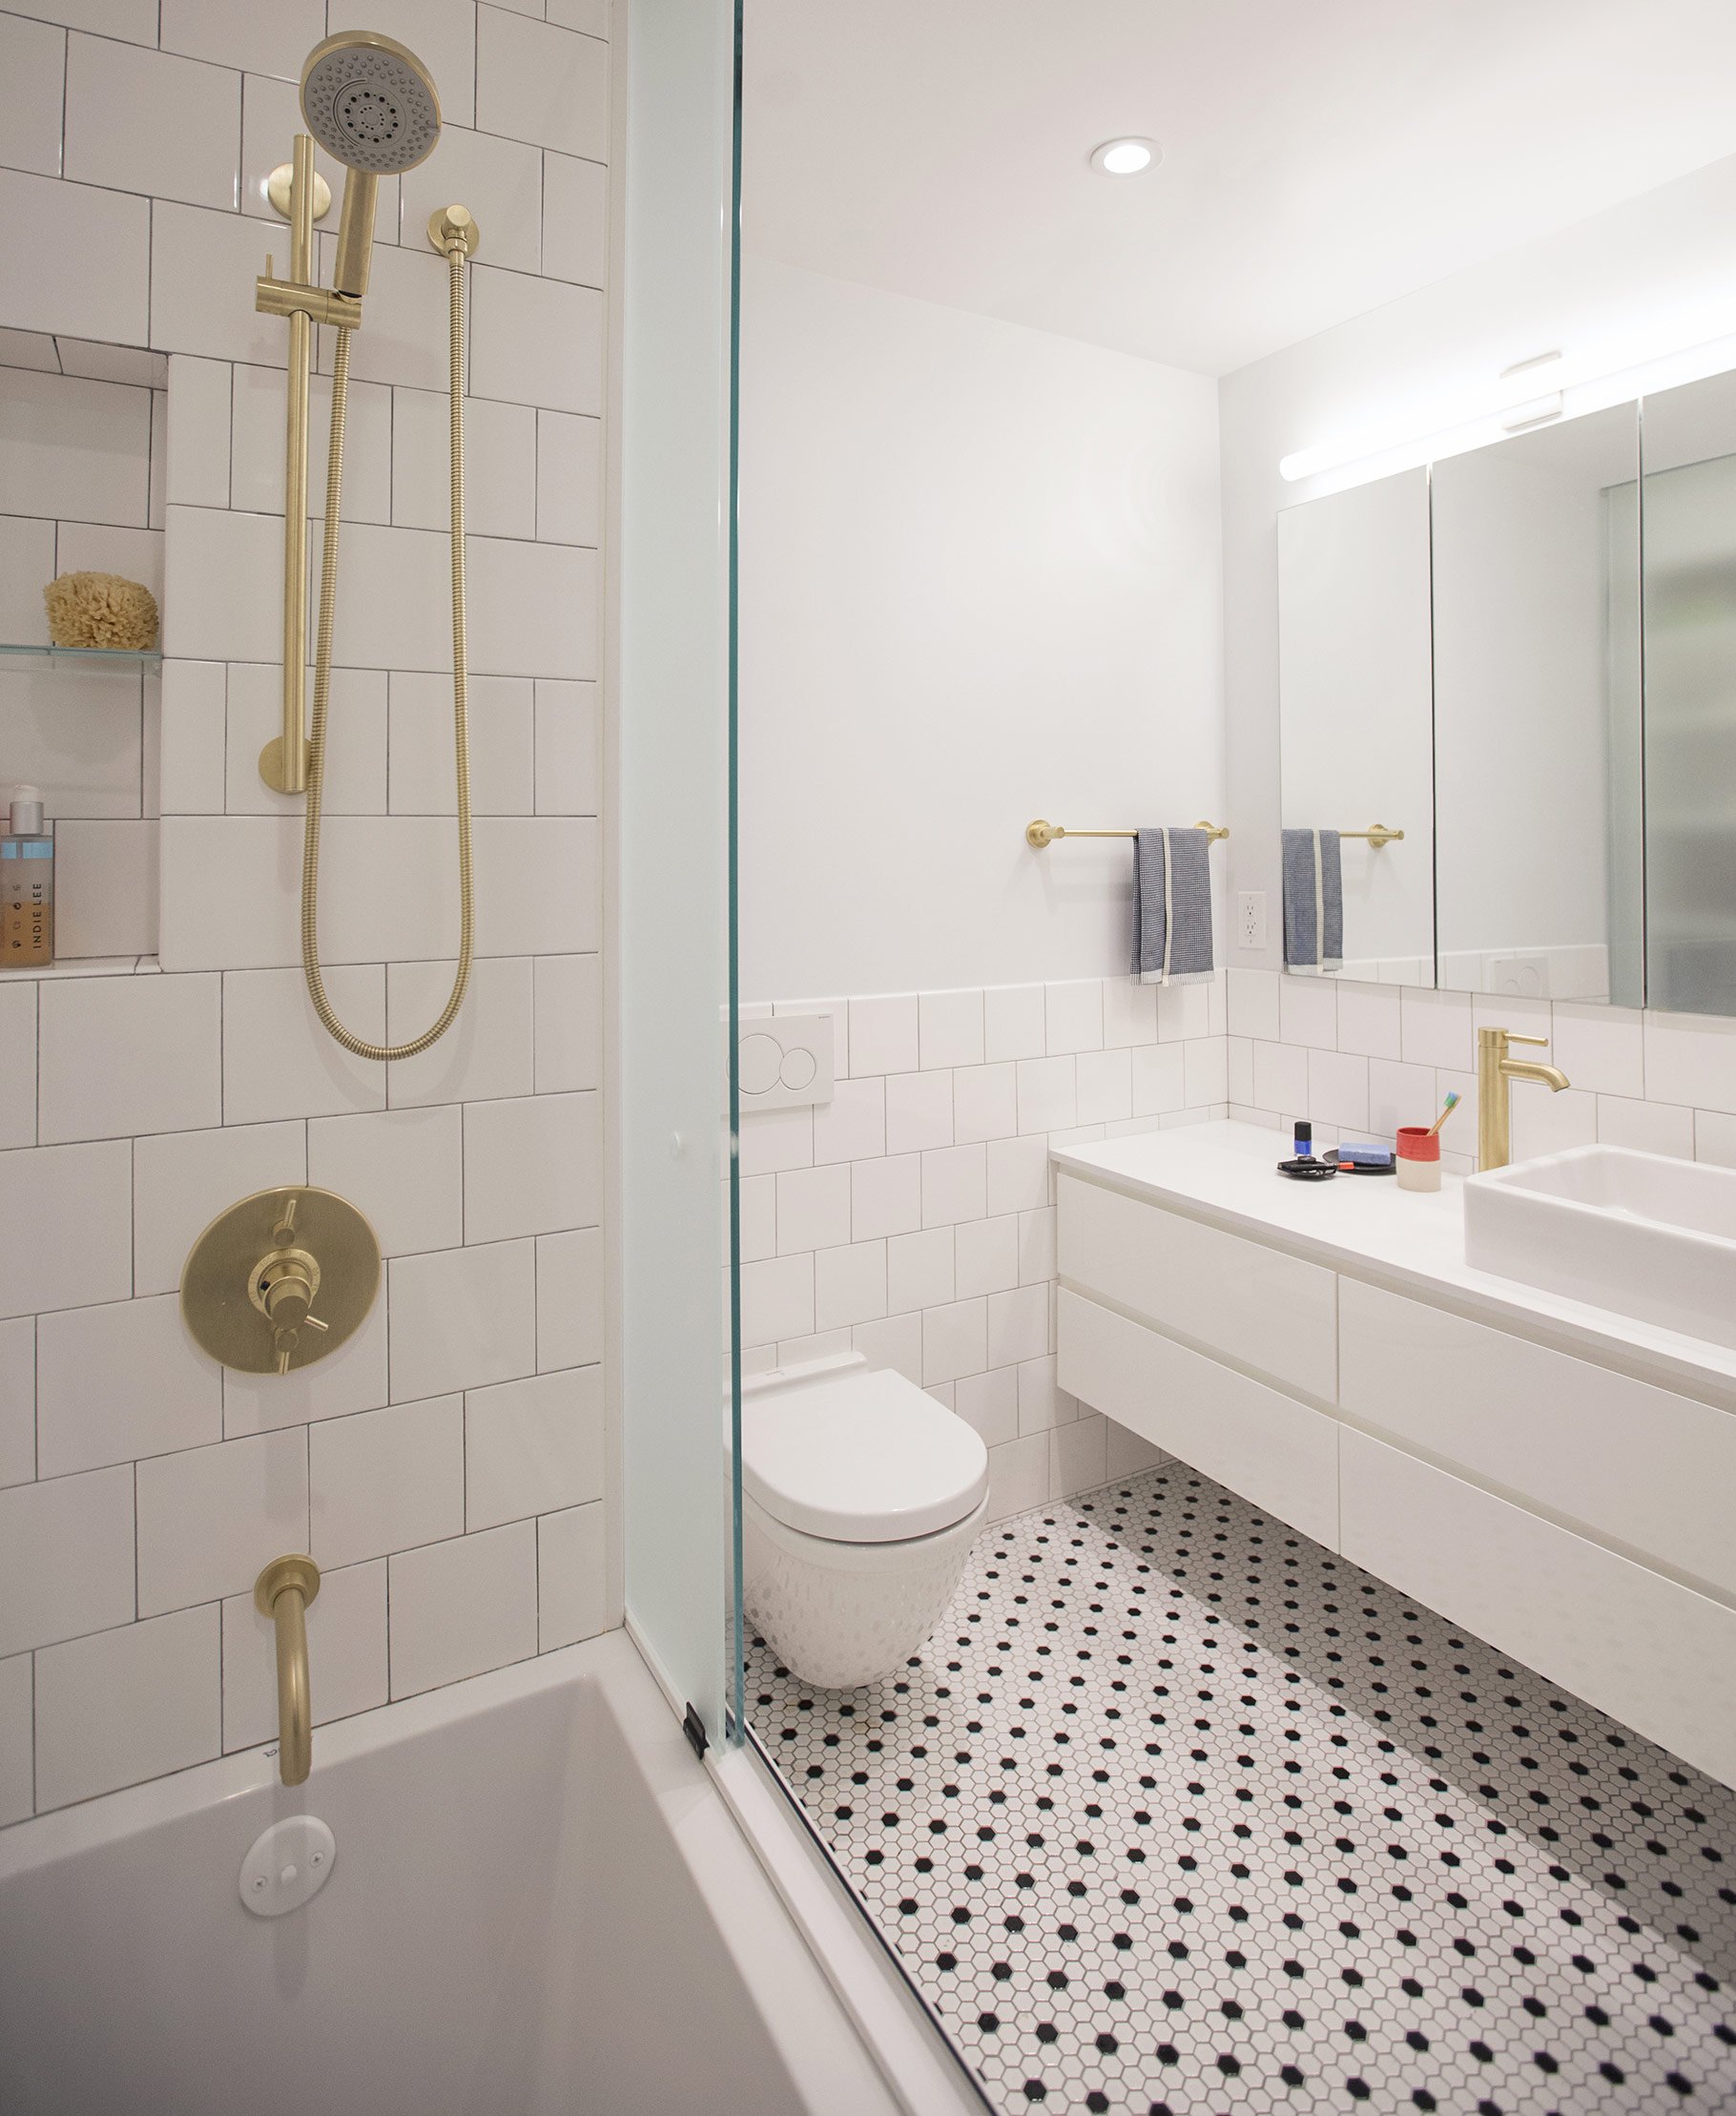 NYC Architect Architecture Renovate Renovation Residential Upper West Side Apartment Co-op Modern Pre-War Bathroom Subway Tile